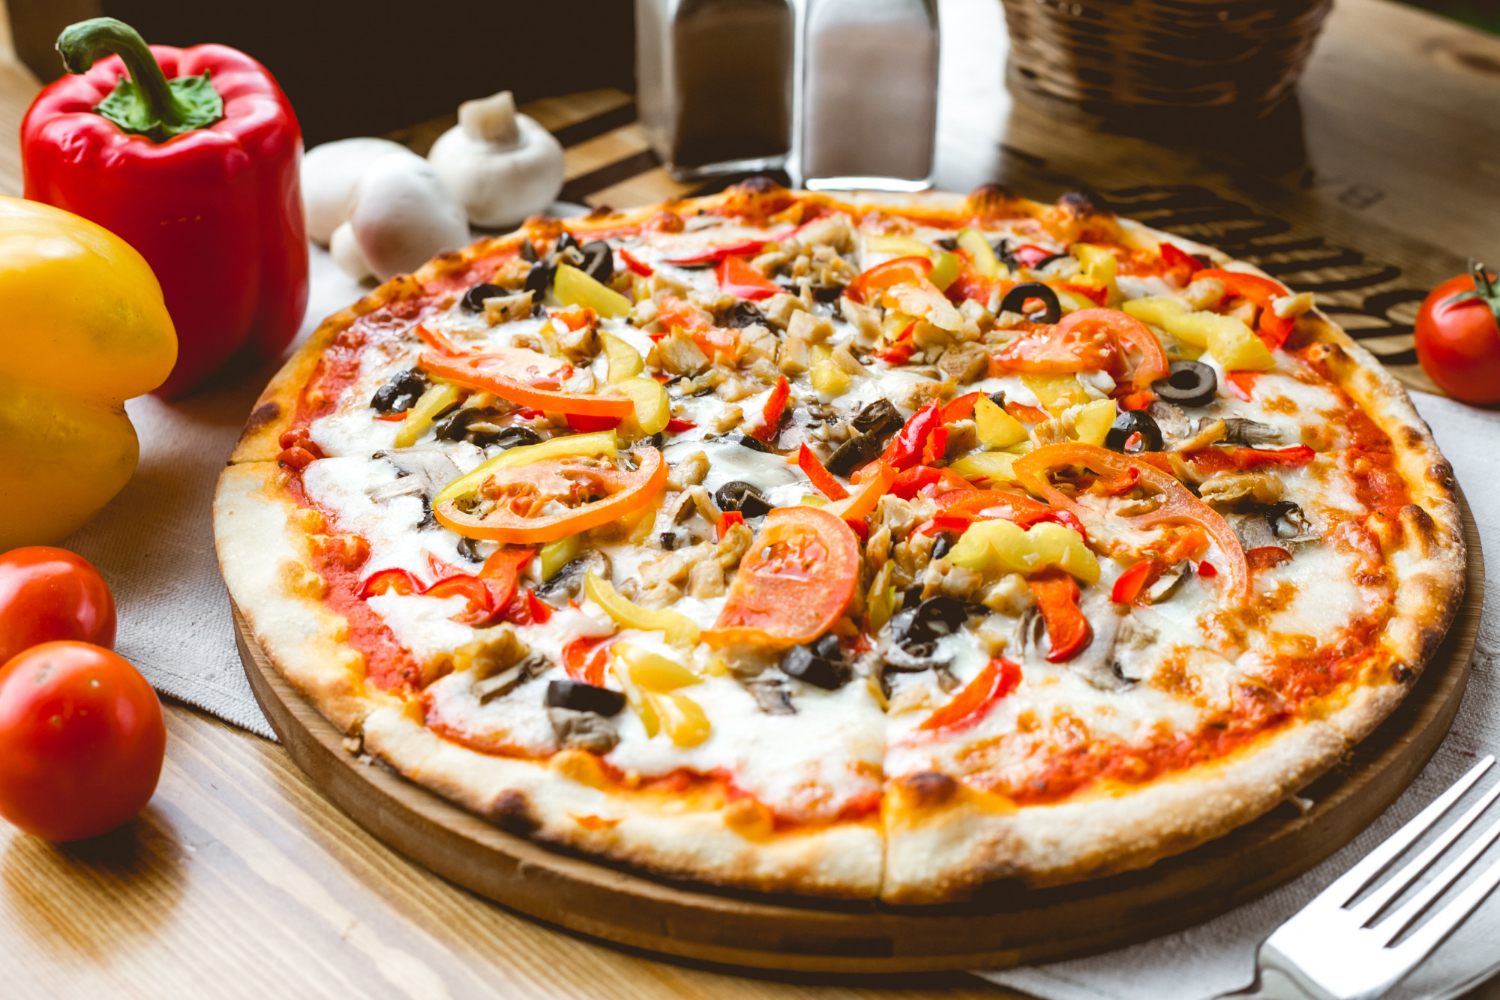 mix-pizza-chicken-tomato-bell-pepper-olives-mushroom-side-view